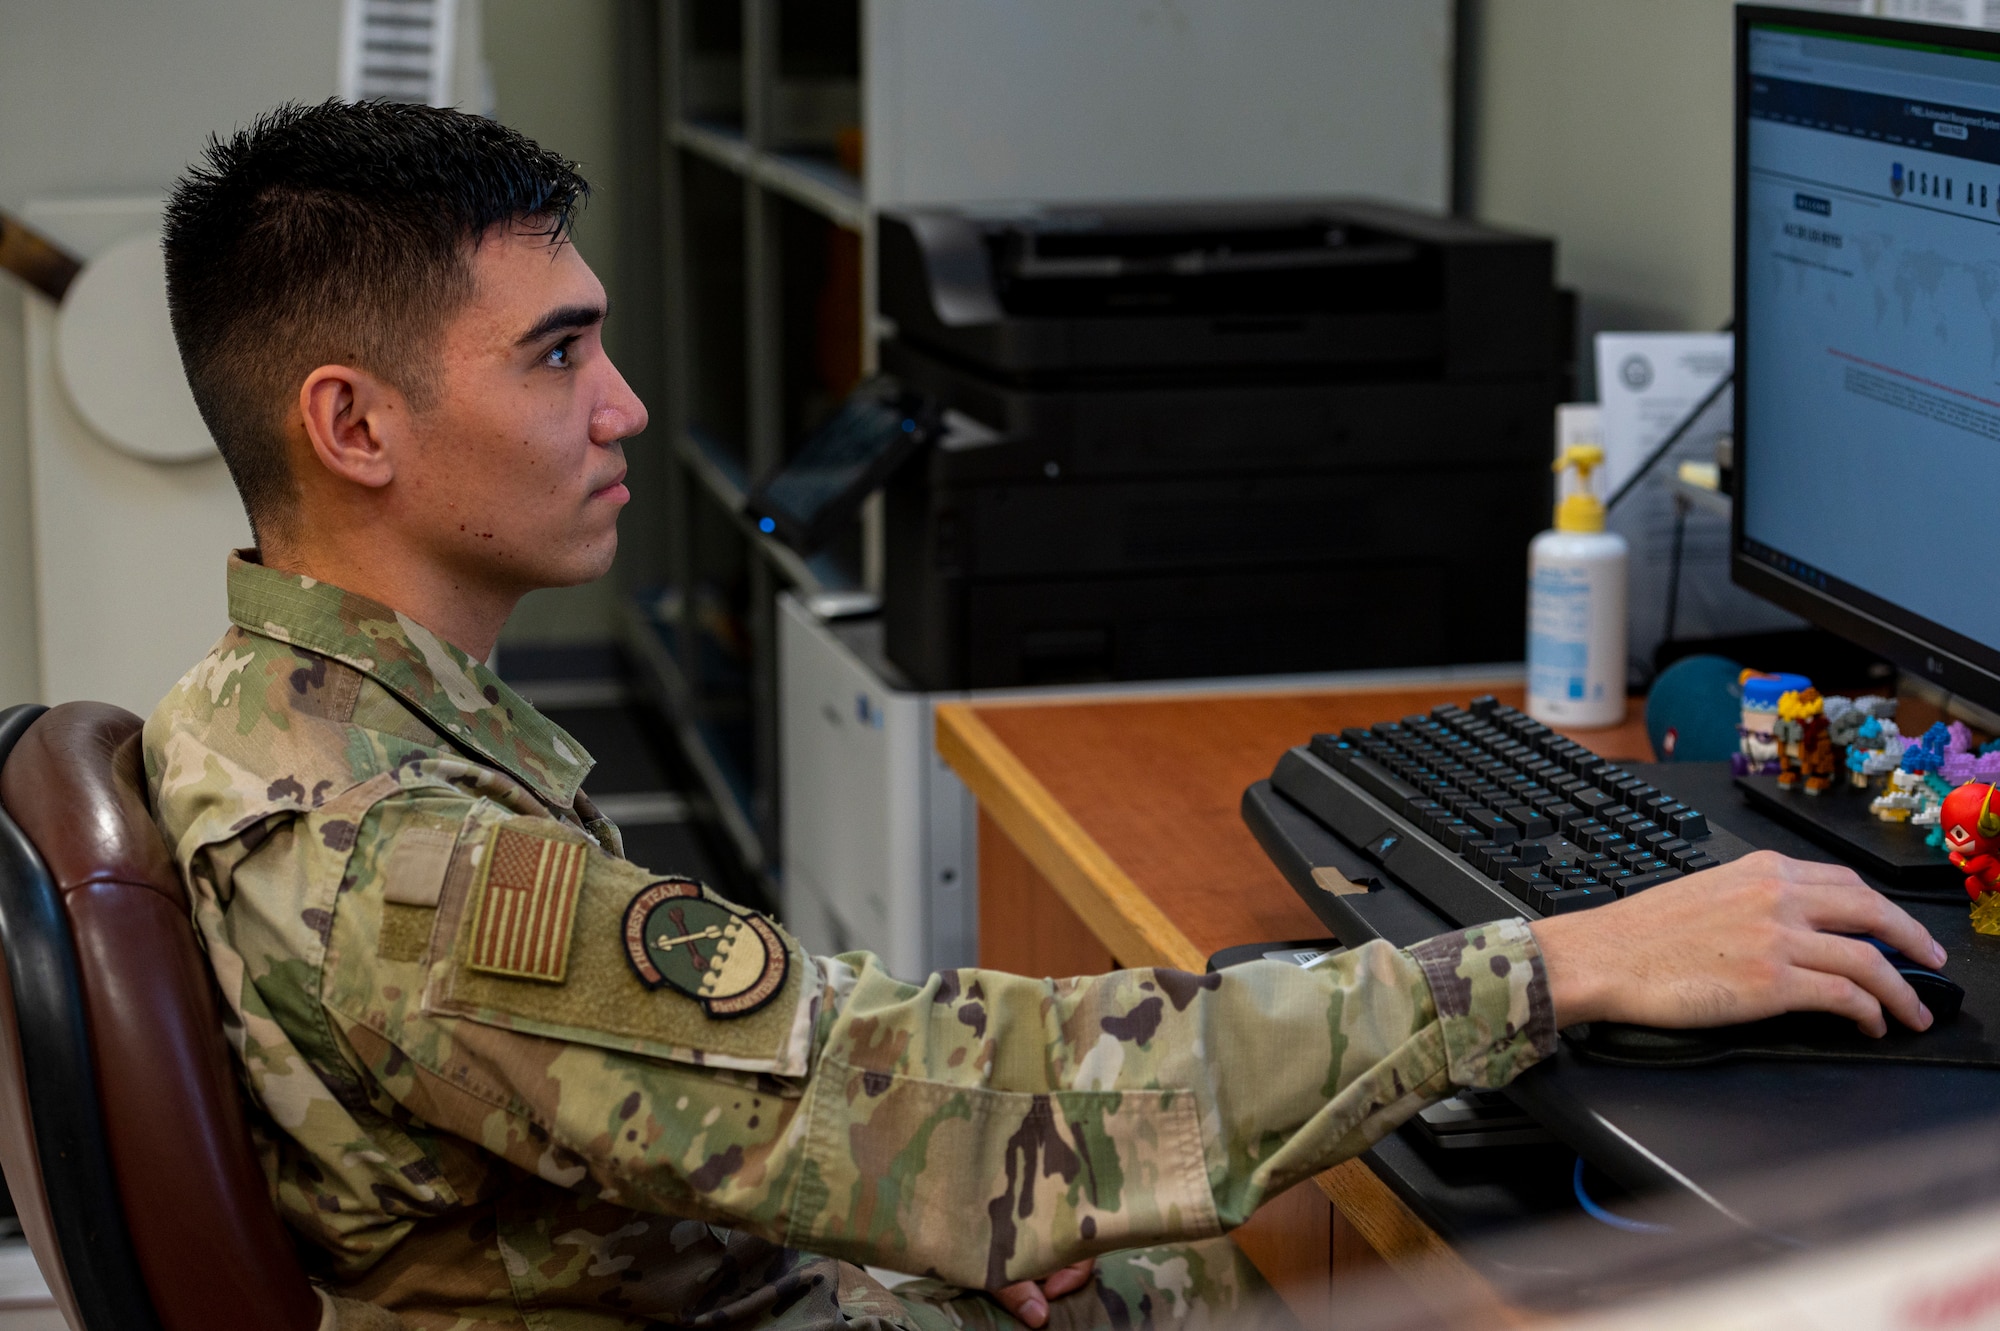 U.S. Air Force Senior Airman Bryant De Los Reyes, 51st Maintenance Squadron precision measurement equipment laboratory logistics technician, works on his computer at Osan Air Base, Republic of Korea, Dec. 15, 2023. De Los Reyes categorizes equipment by highest priority, allowing critical equipment to be calibrated and sent back to the customer in a timely manner. (U.S. Air Force photo by Senior Airman Kaitlin Castillo)